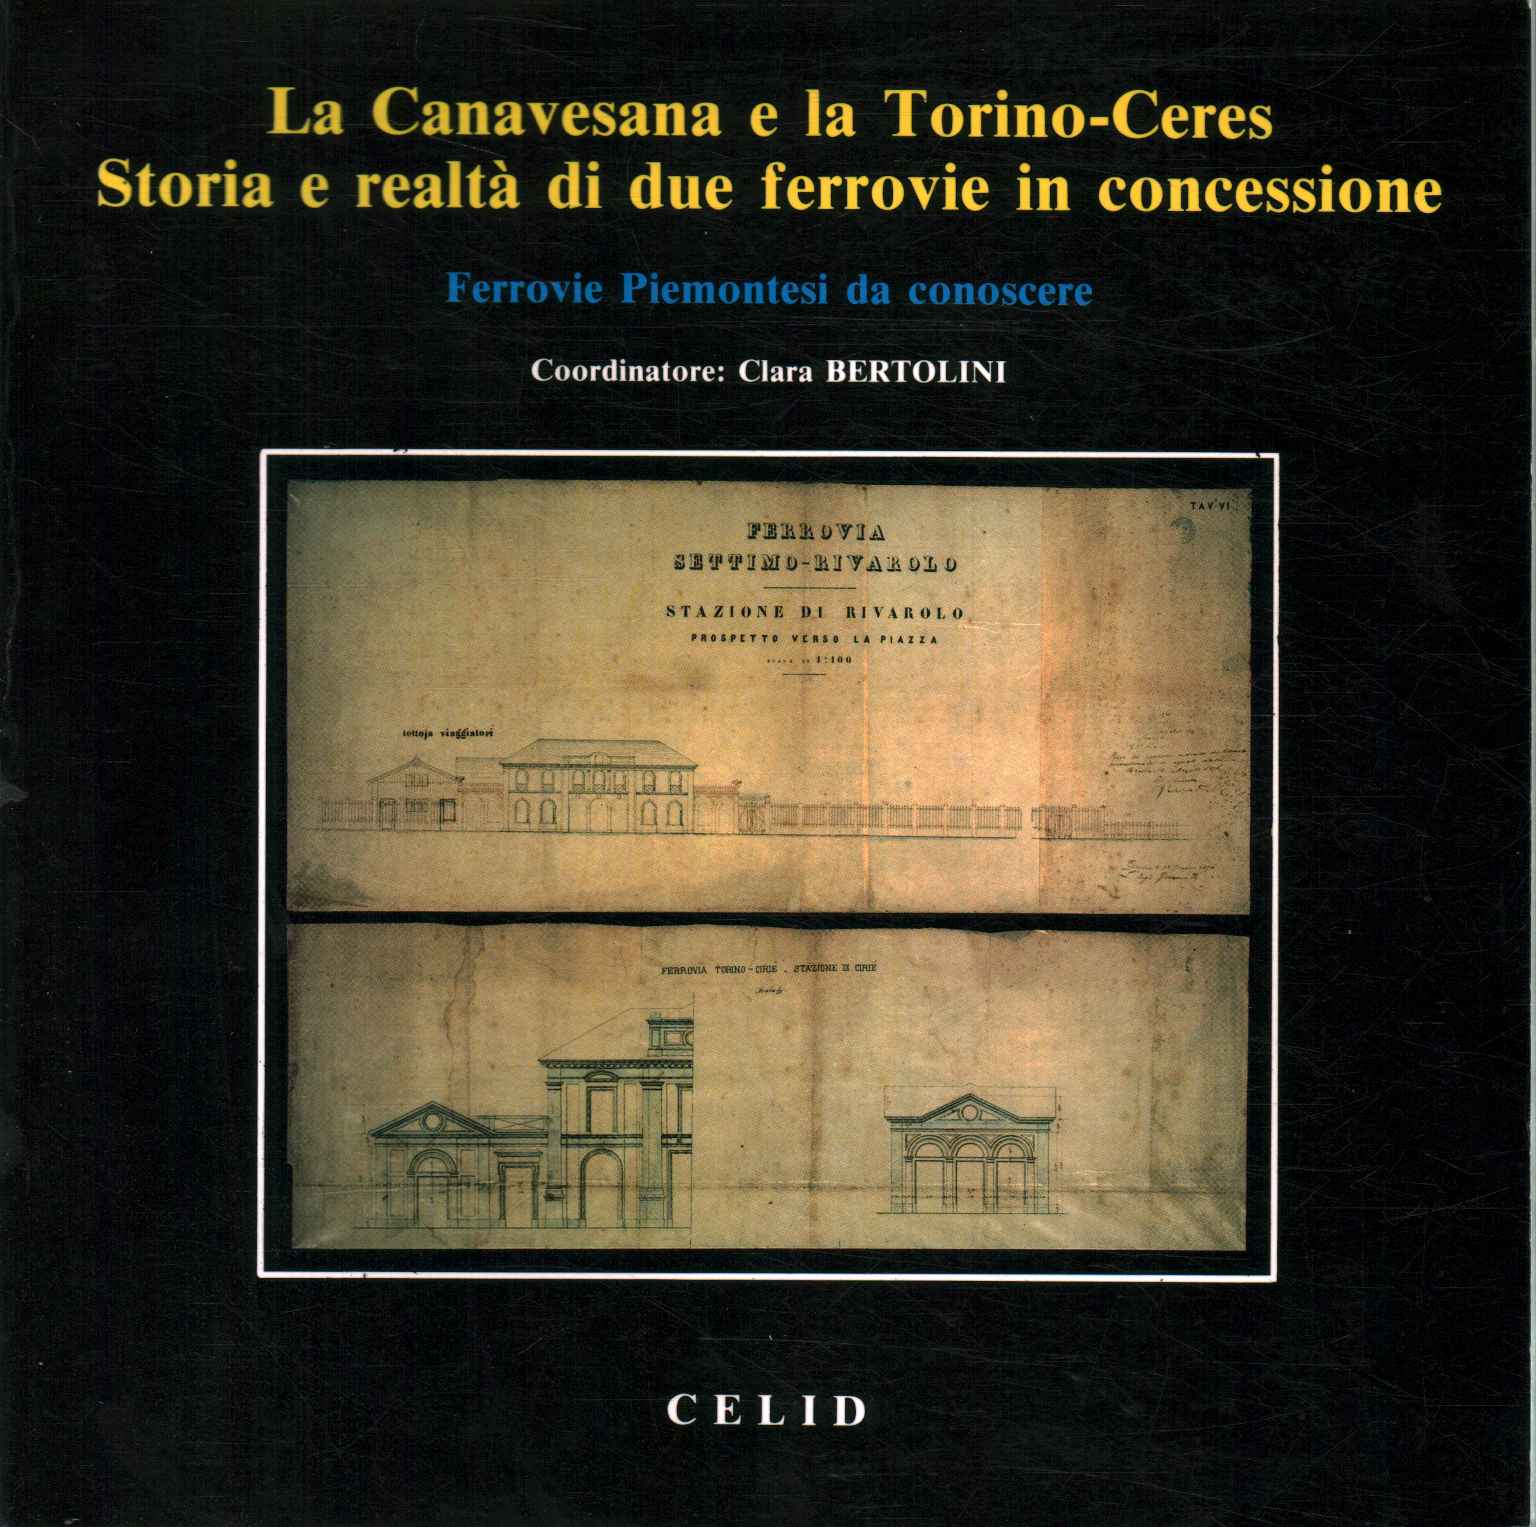 The Canavesana and the Turin-Ceres: history%,The Canavesana and the Turin-Ceres: history%